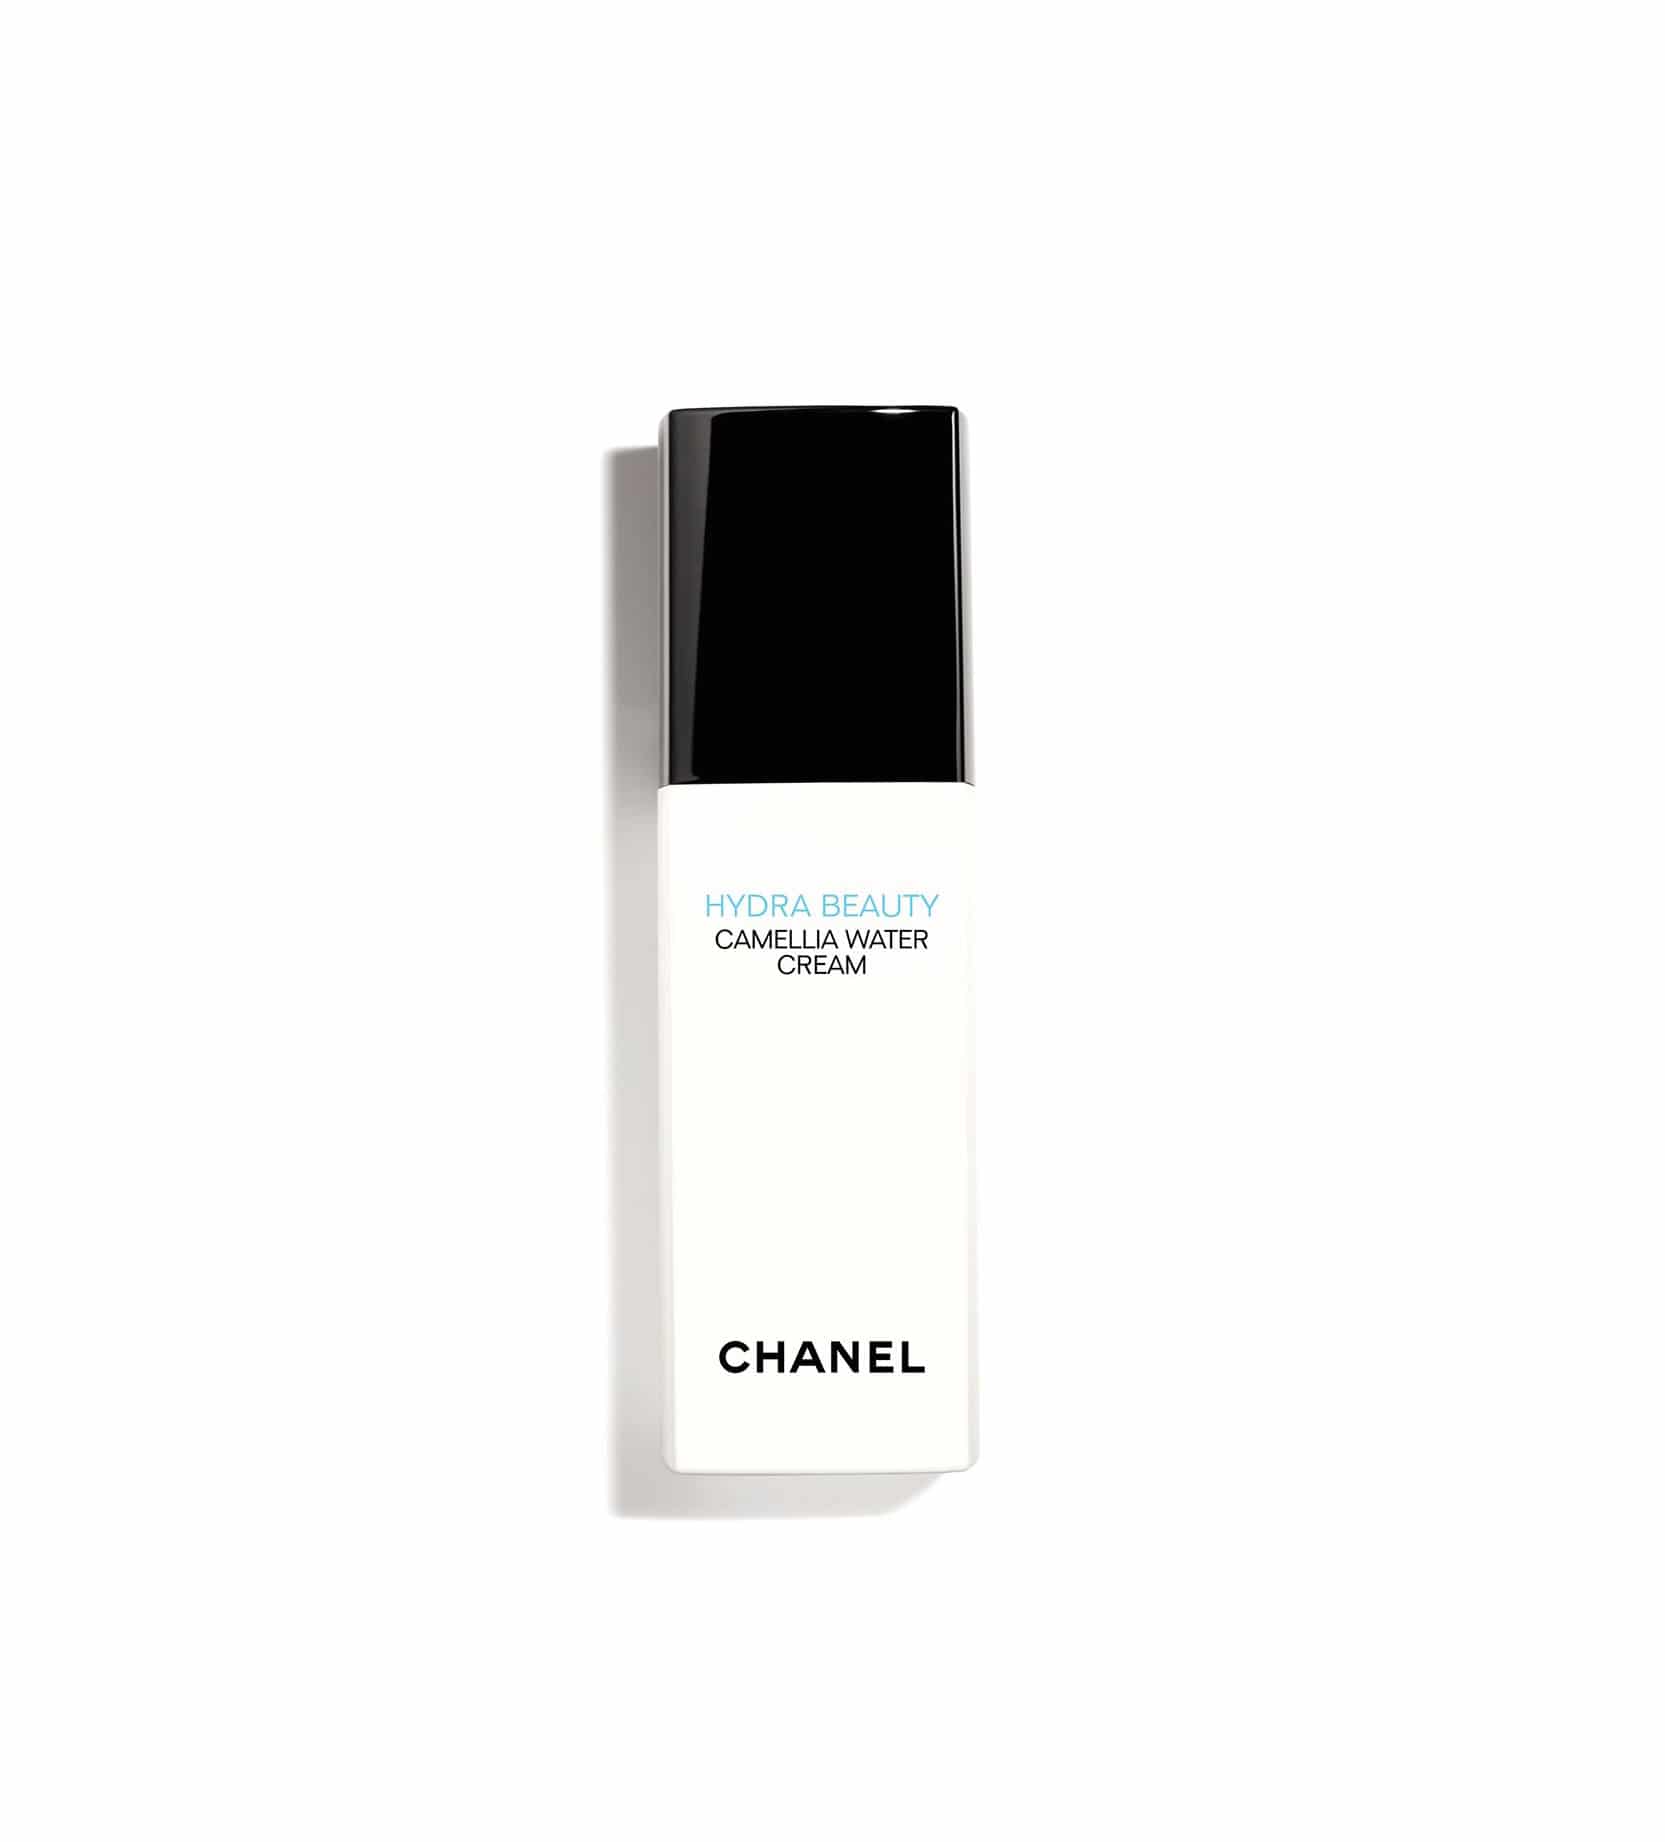 Chanel - Hydra Beauty Camellia Water